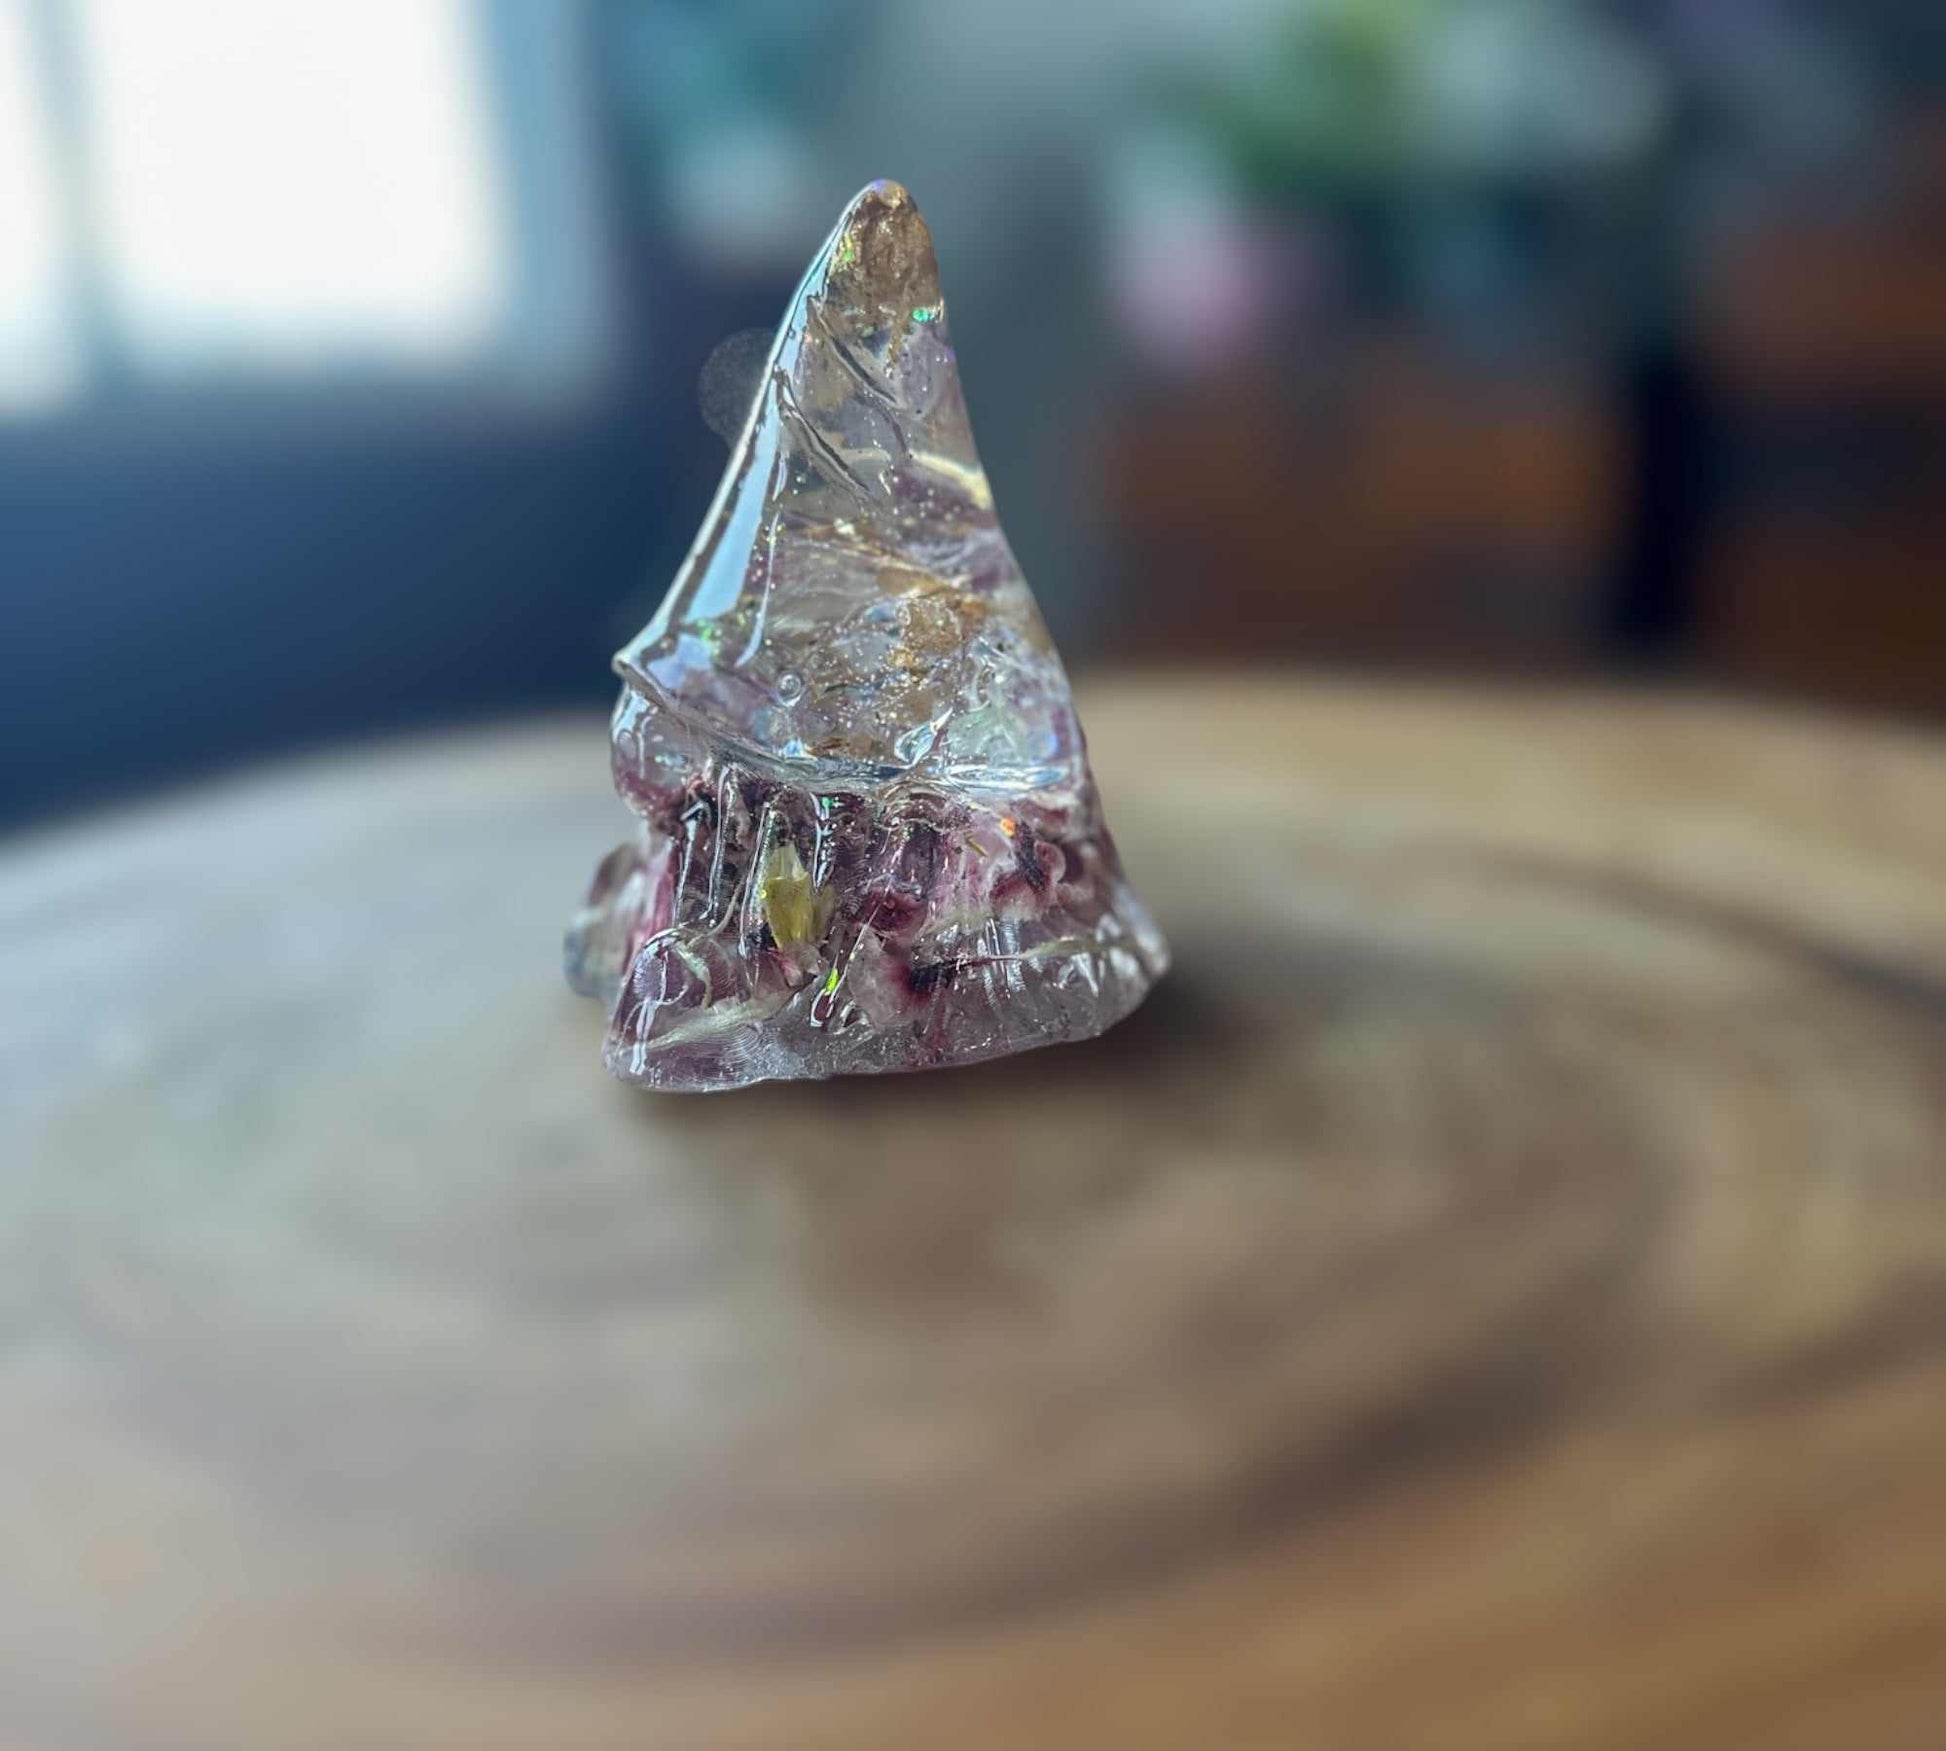 Whimsical Resin Gnomes - Gnome Sweet Gnome Delights for Your Home 